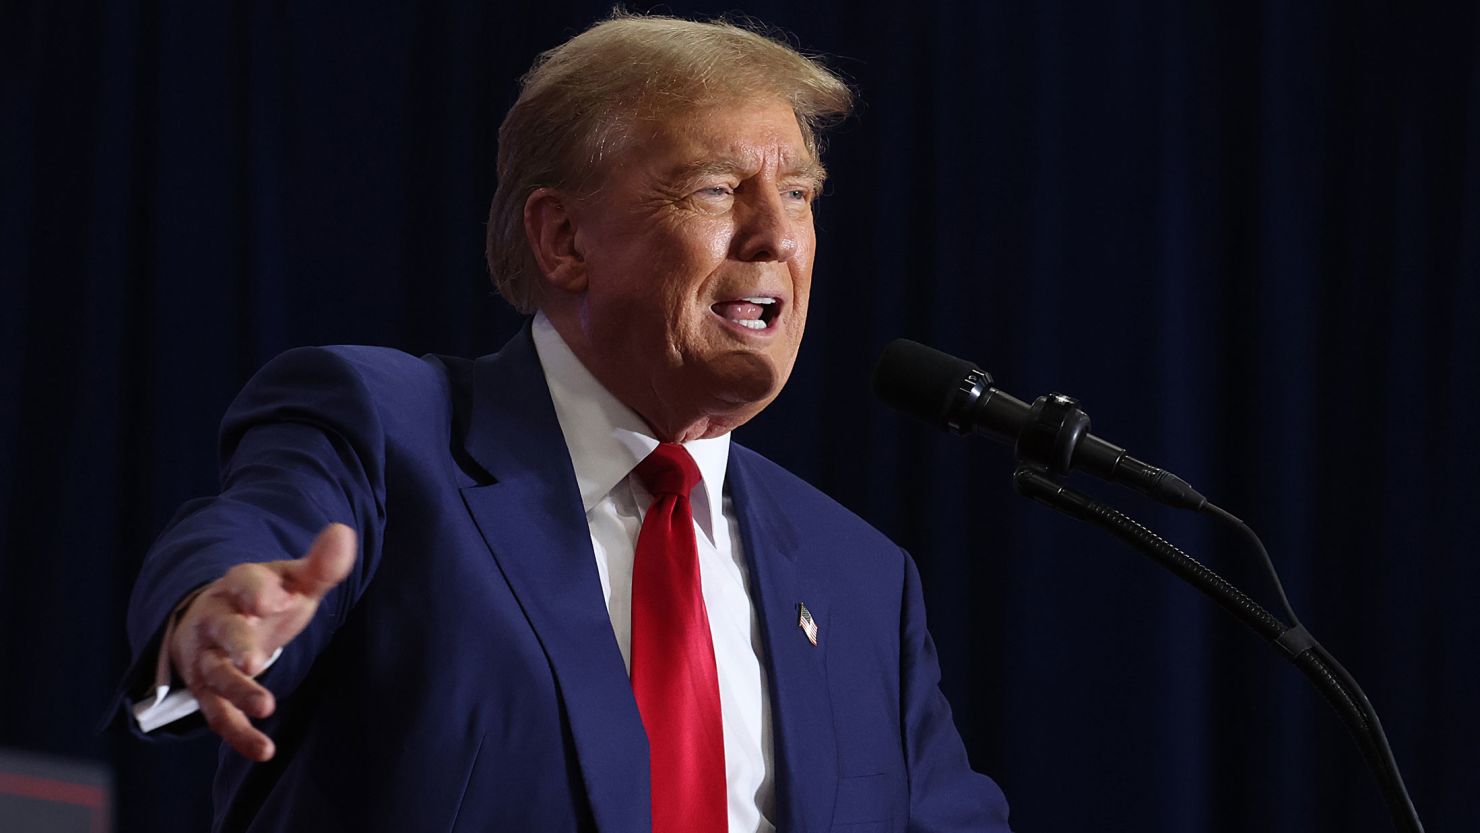 GREEN BAY, WISCONSIN - APRIL 02: Former President Donald Trump speaks to guests at a rally on April 02, 2024 in Green Bay, Wisconsin. (Photo by Scott Olson/Getty Images)